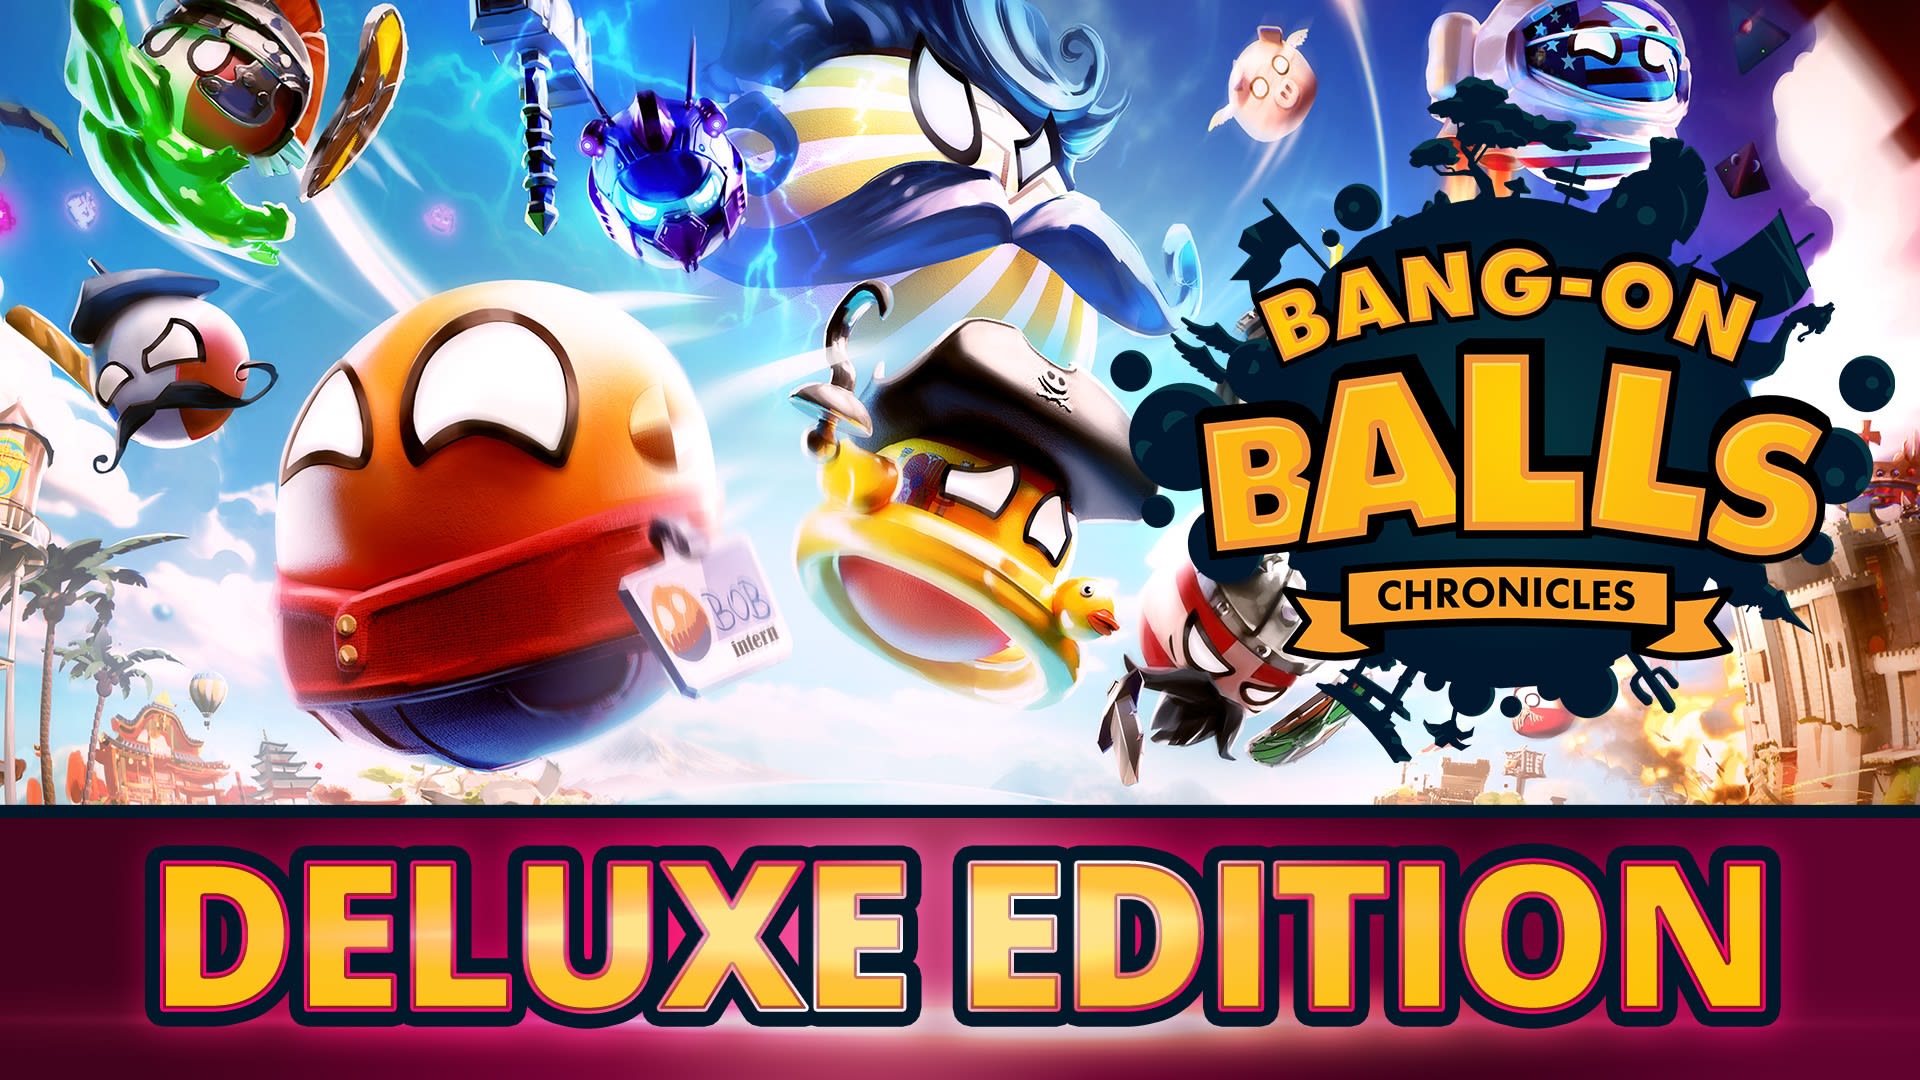 Bang-On Balls: Chronicles Deluxe Edition